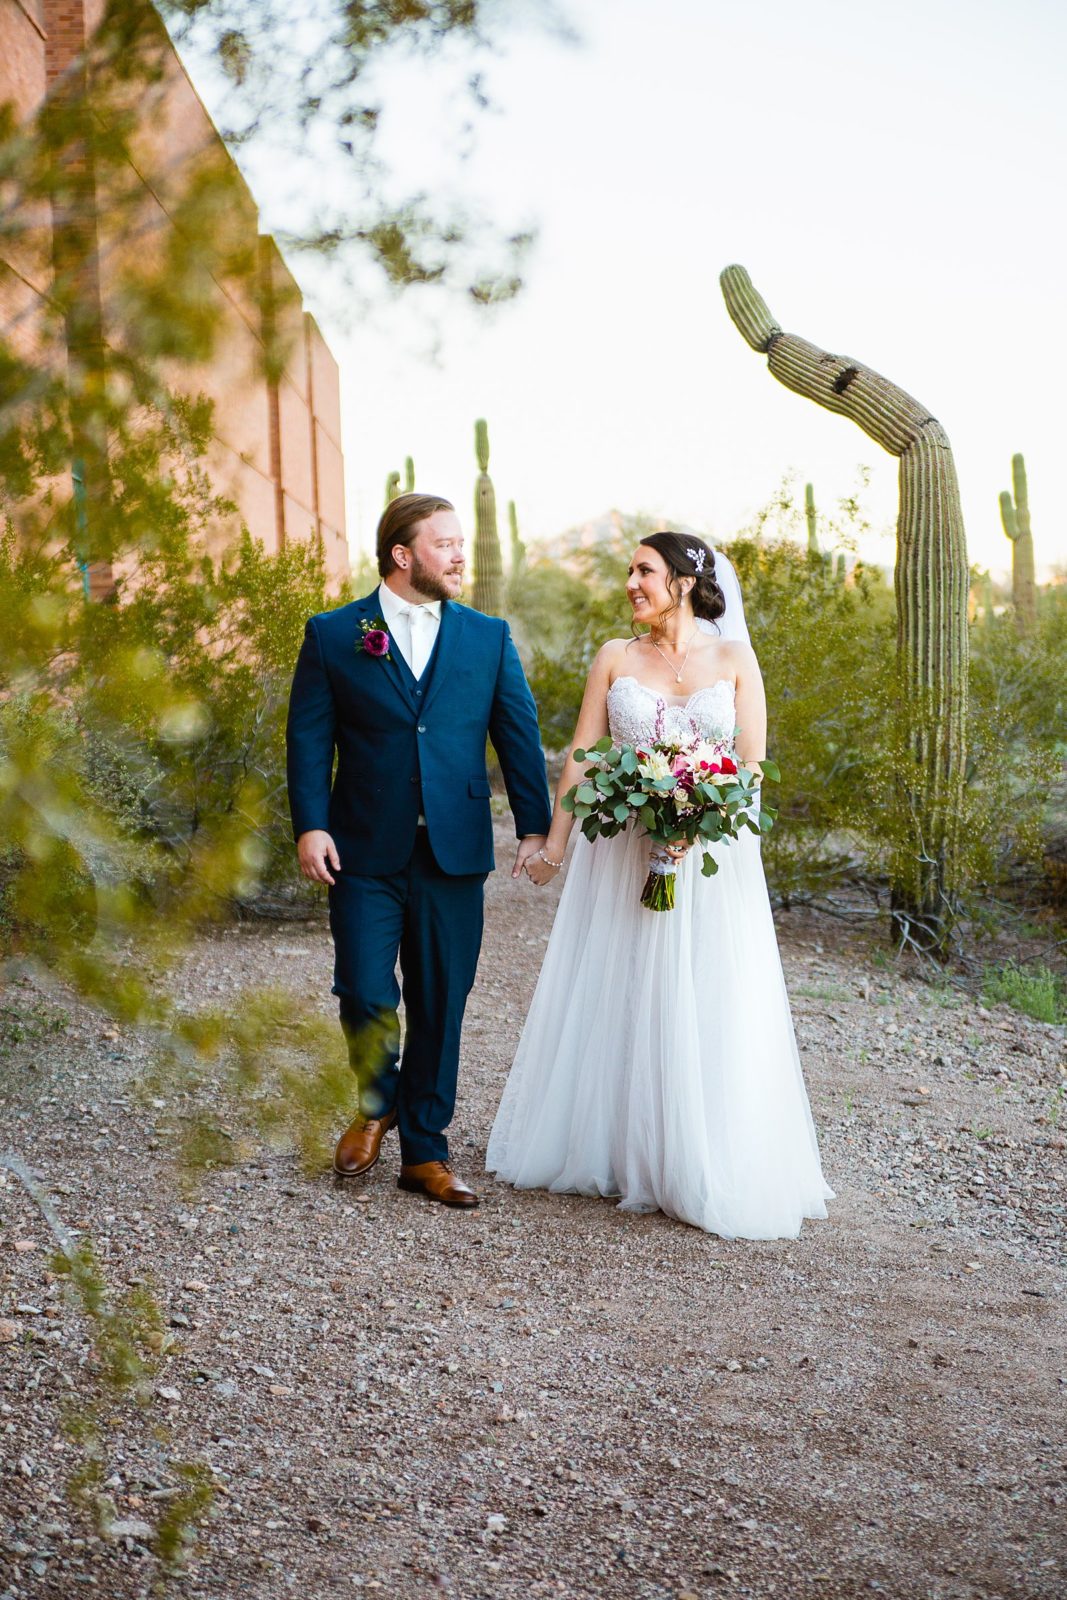 Bride and Groom walking together during their Arizona Heritage Center at Papago Park wedding by Tempe wedding photographer PMA Photography.